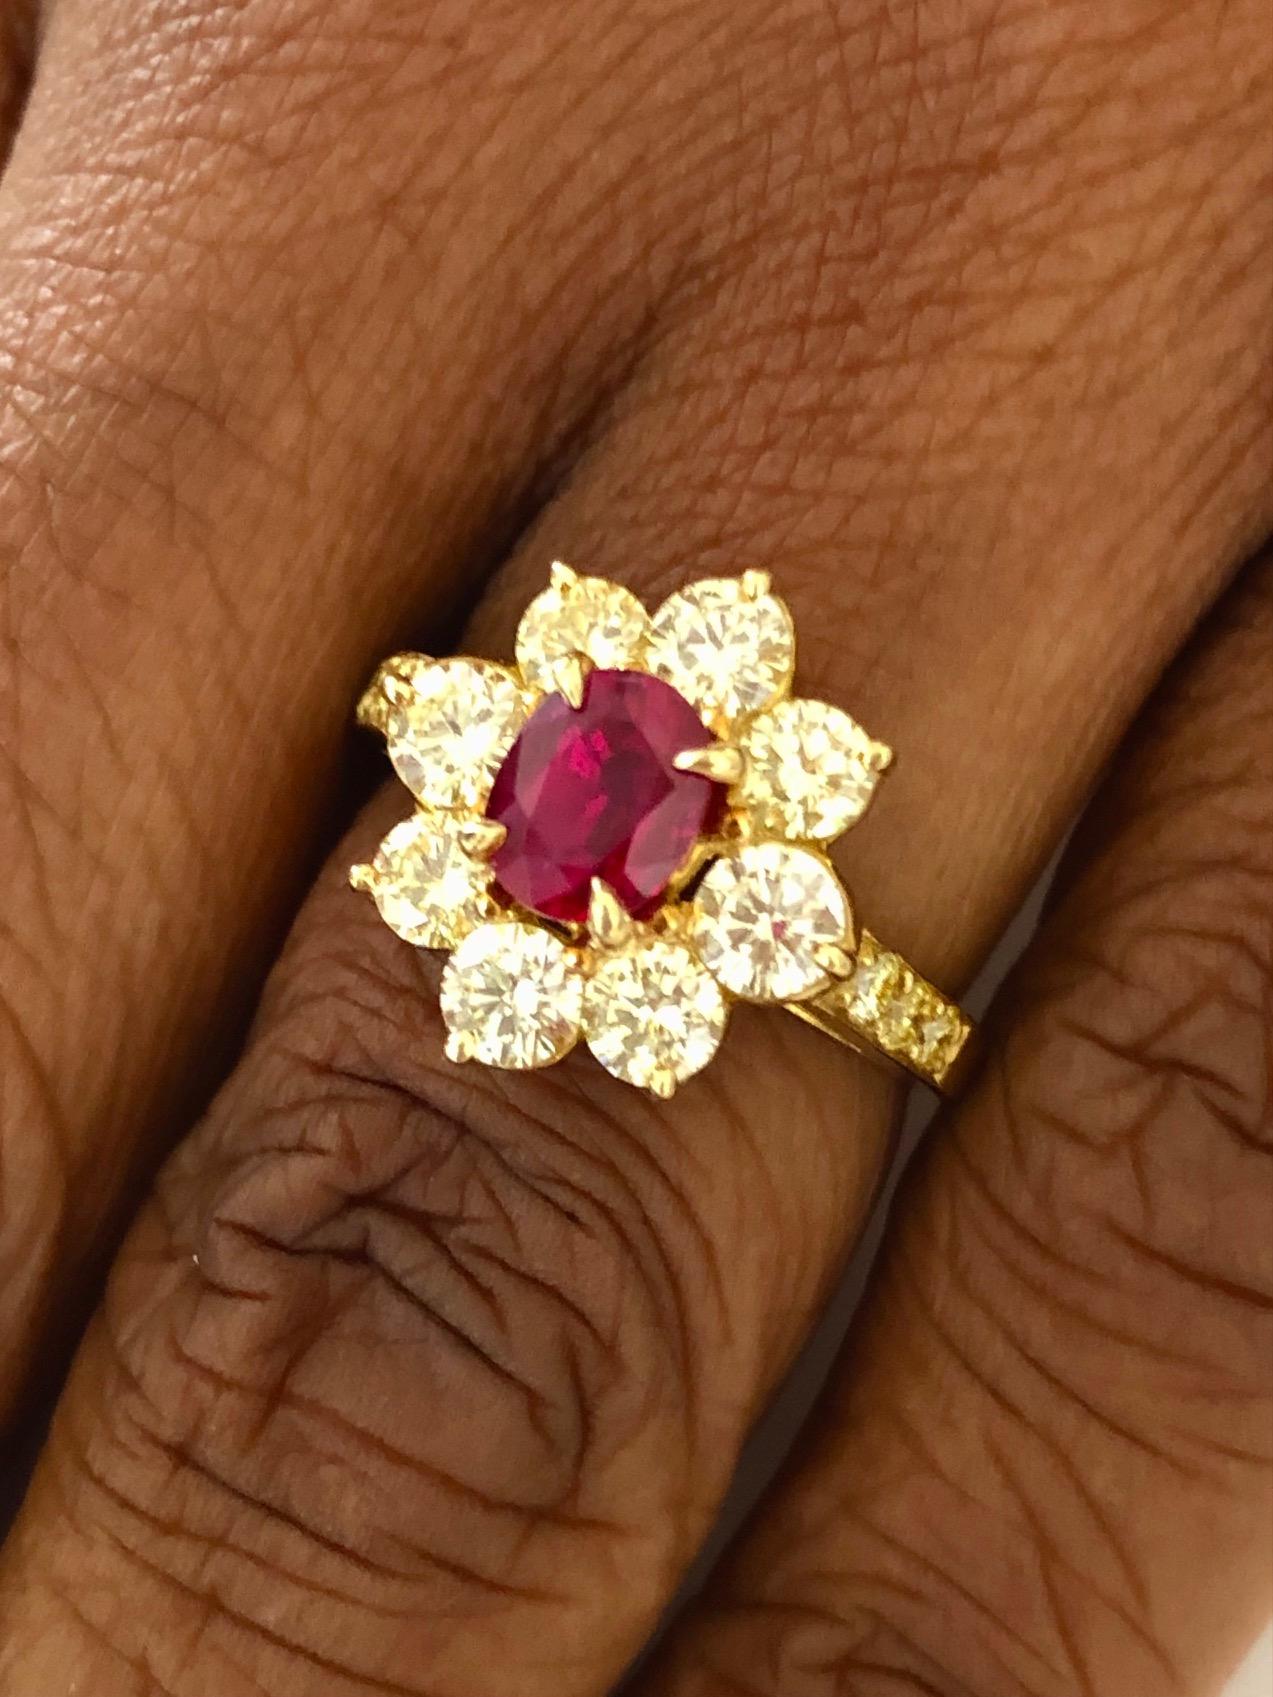 Fine 18K Yellow fold Ring, set with a Red Burma Ruby 1.04 carats and 14 Diamonds 1.47 carats.

We design and manufacture our jewelry in our workshop, located in New York City's diamond district.